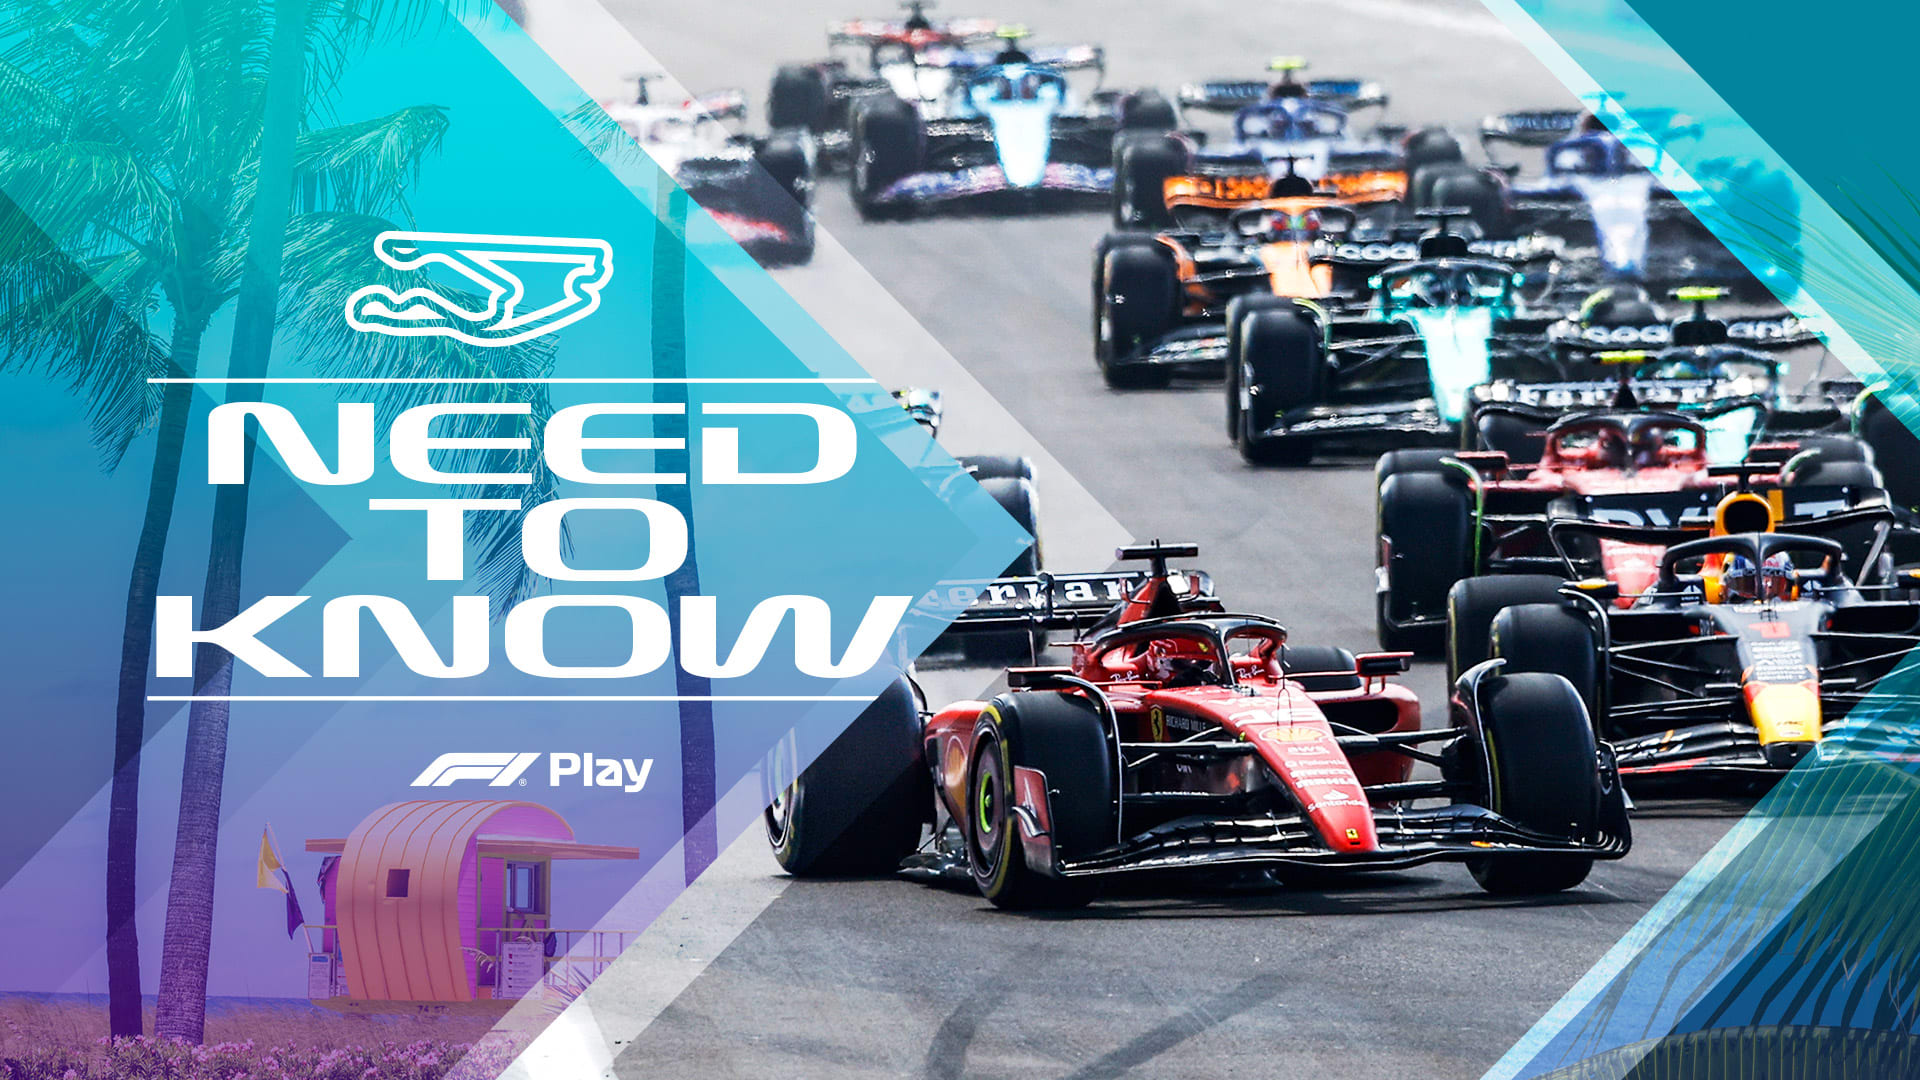 NEED TO KNOW The most important facts, stats and trivia ahead of the 2023 Miami Grand Prix Formula 1®